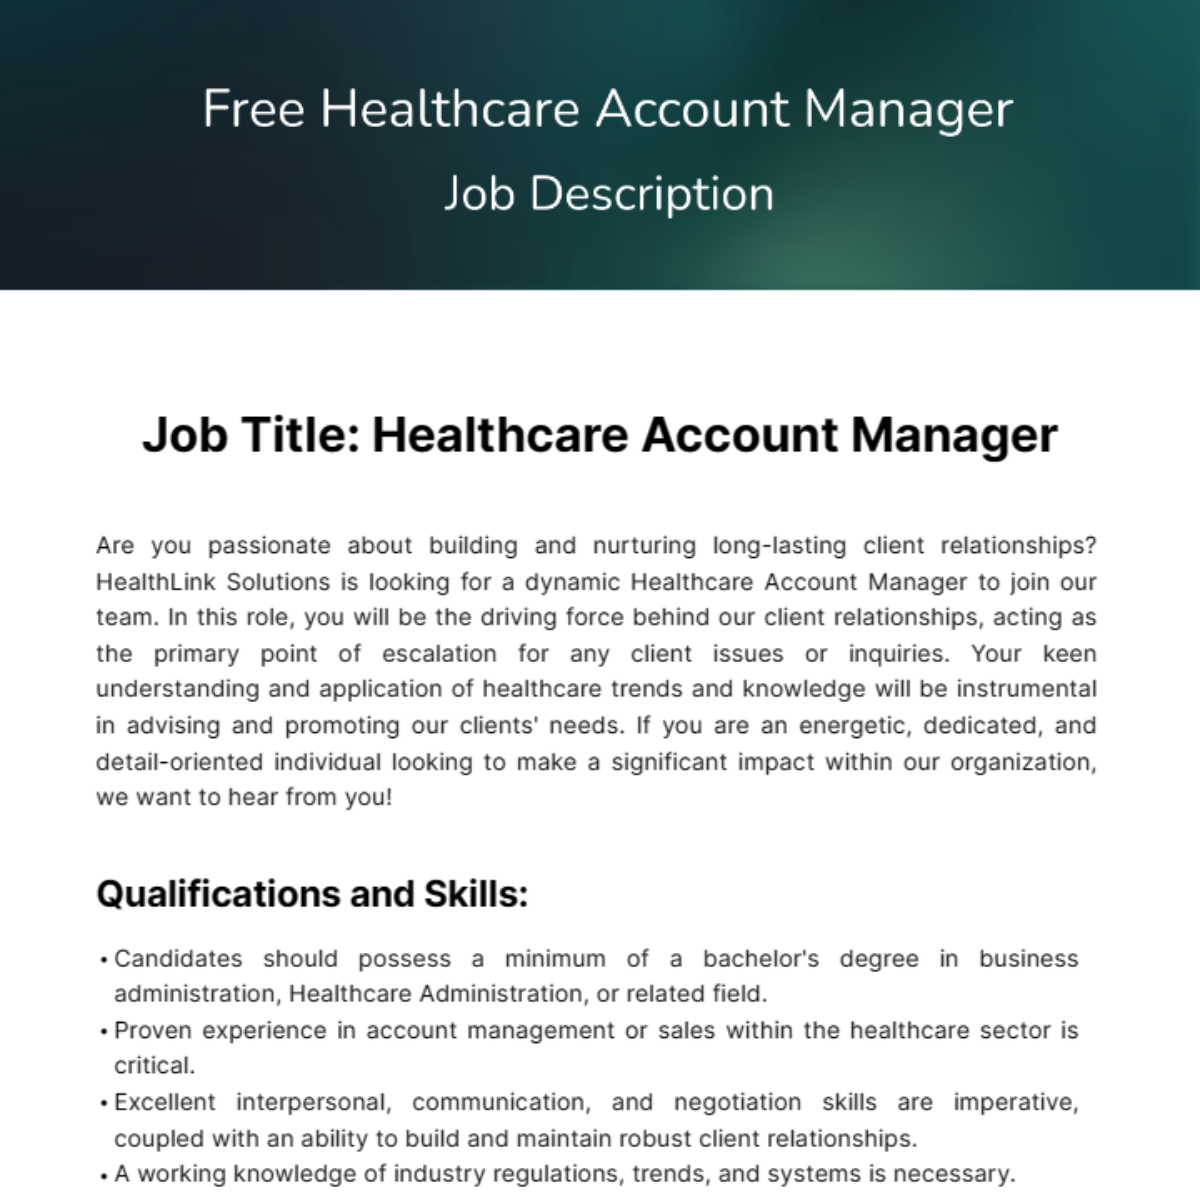 Free Healthcare Job Description Templates And Examples Edit Online And Download